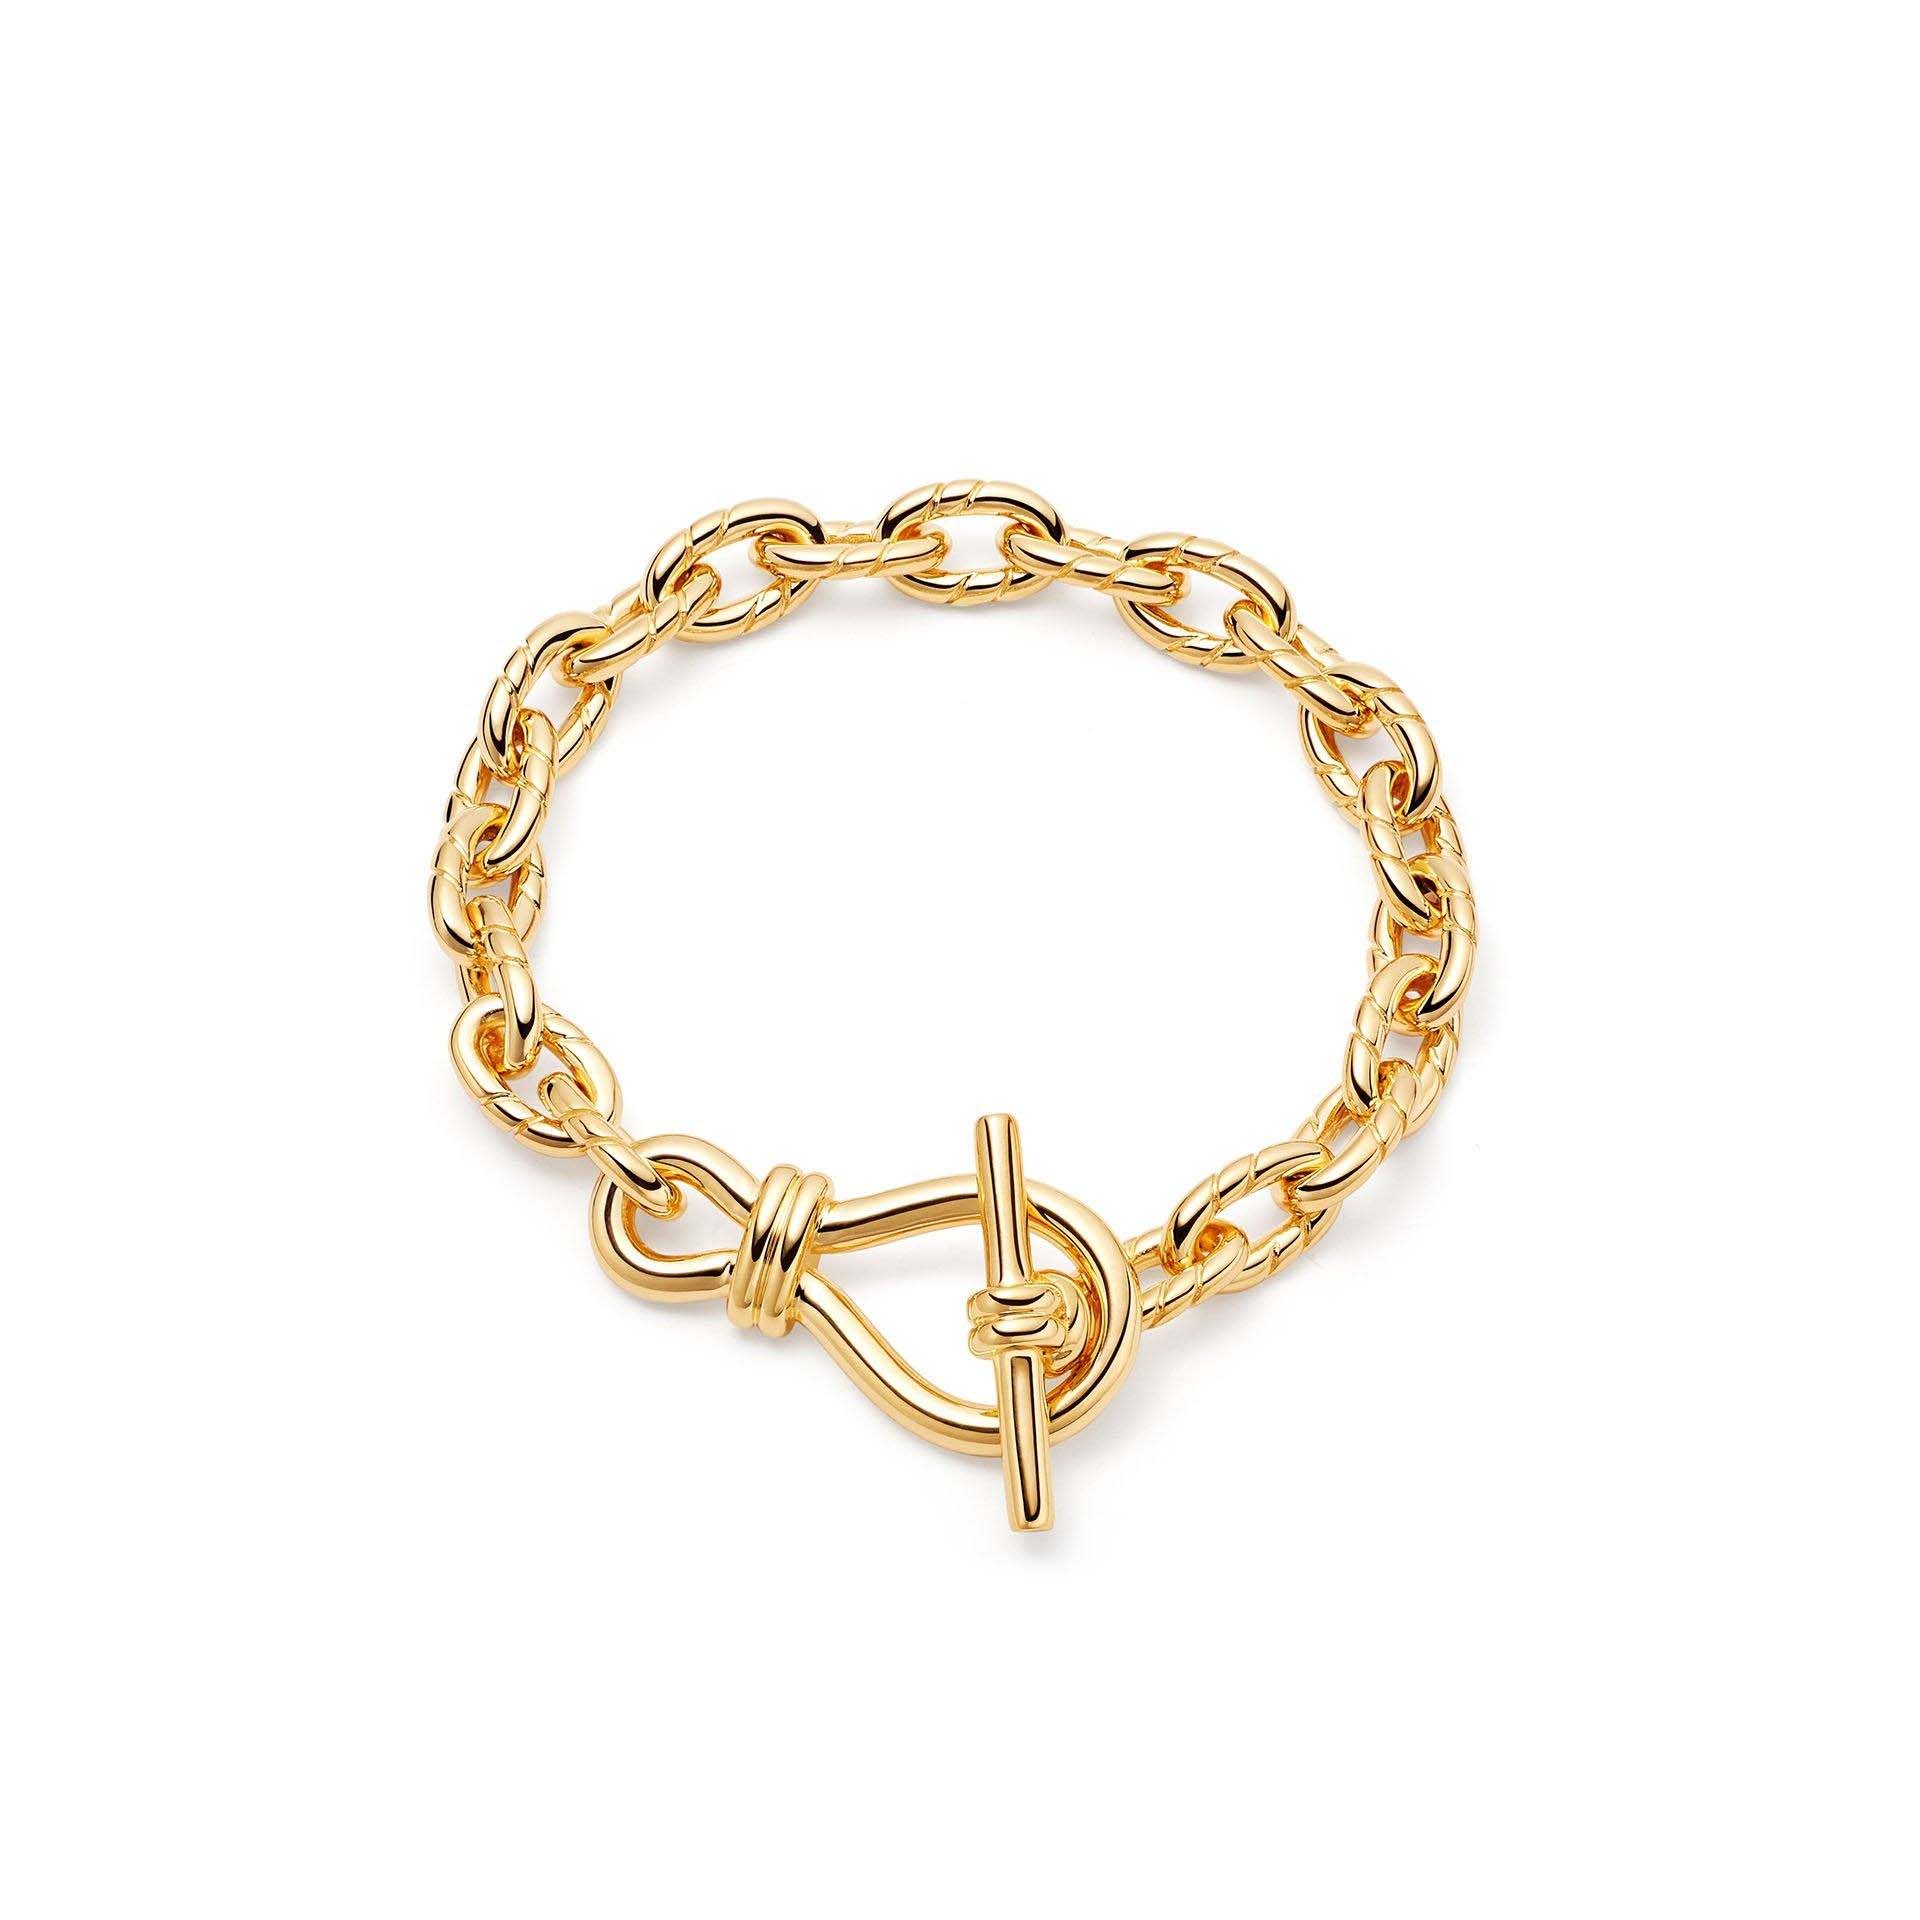 Wholesale OEM/ODM Jewelry Custom OEM chain bracelet in 18ct Gold Plated on Brass or 925 sterling silver